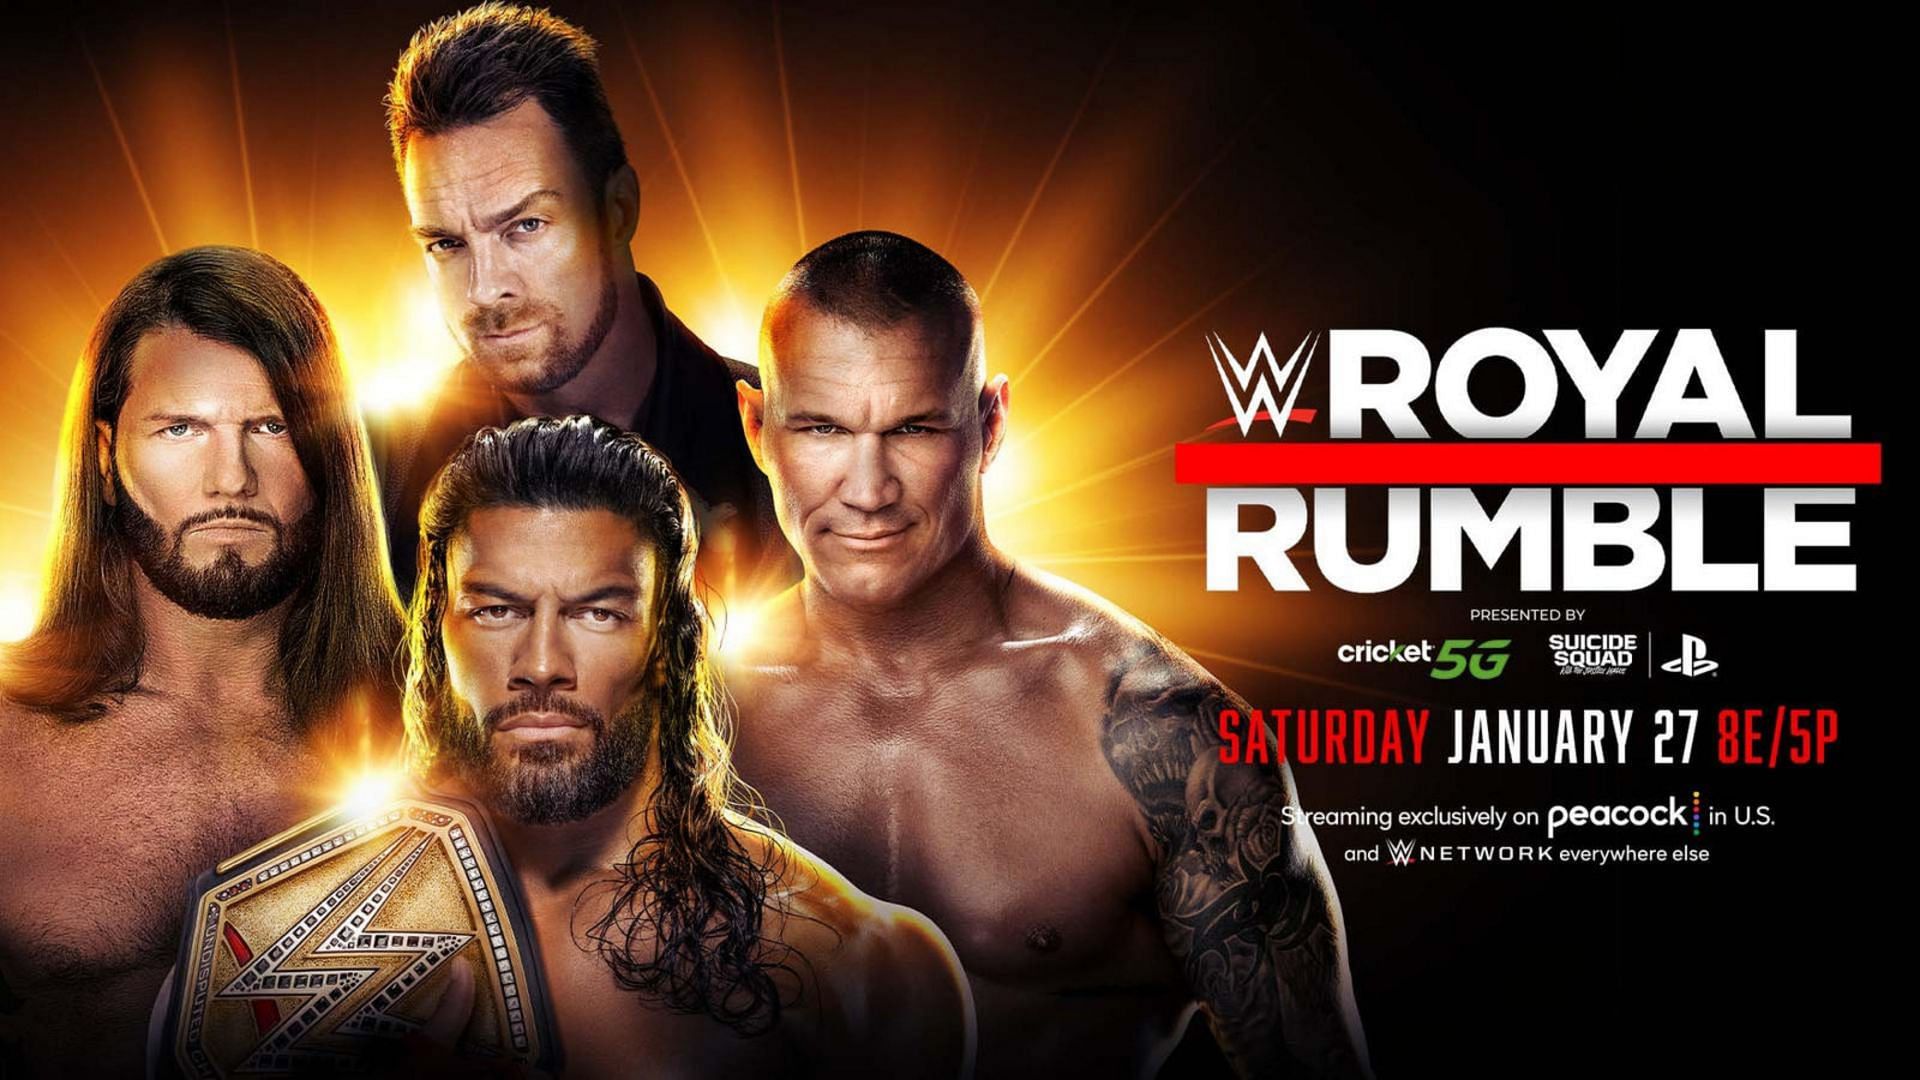 Roman Reigns will defend his Undisputed WWE Universal Championship at Royal Rumble